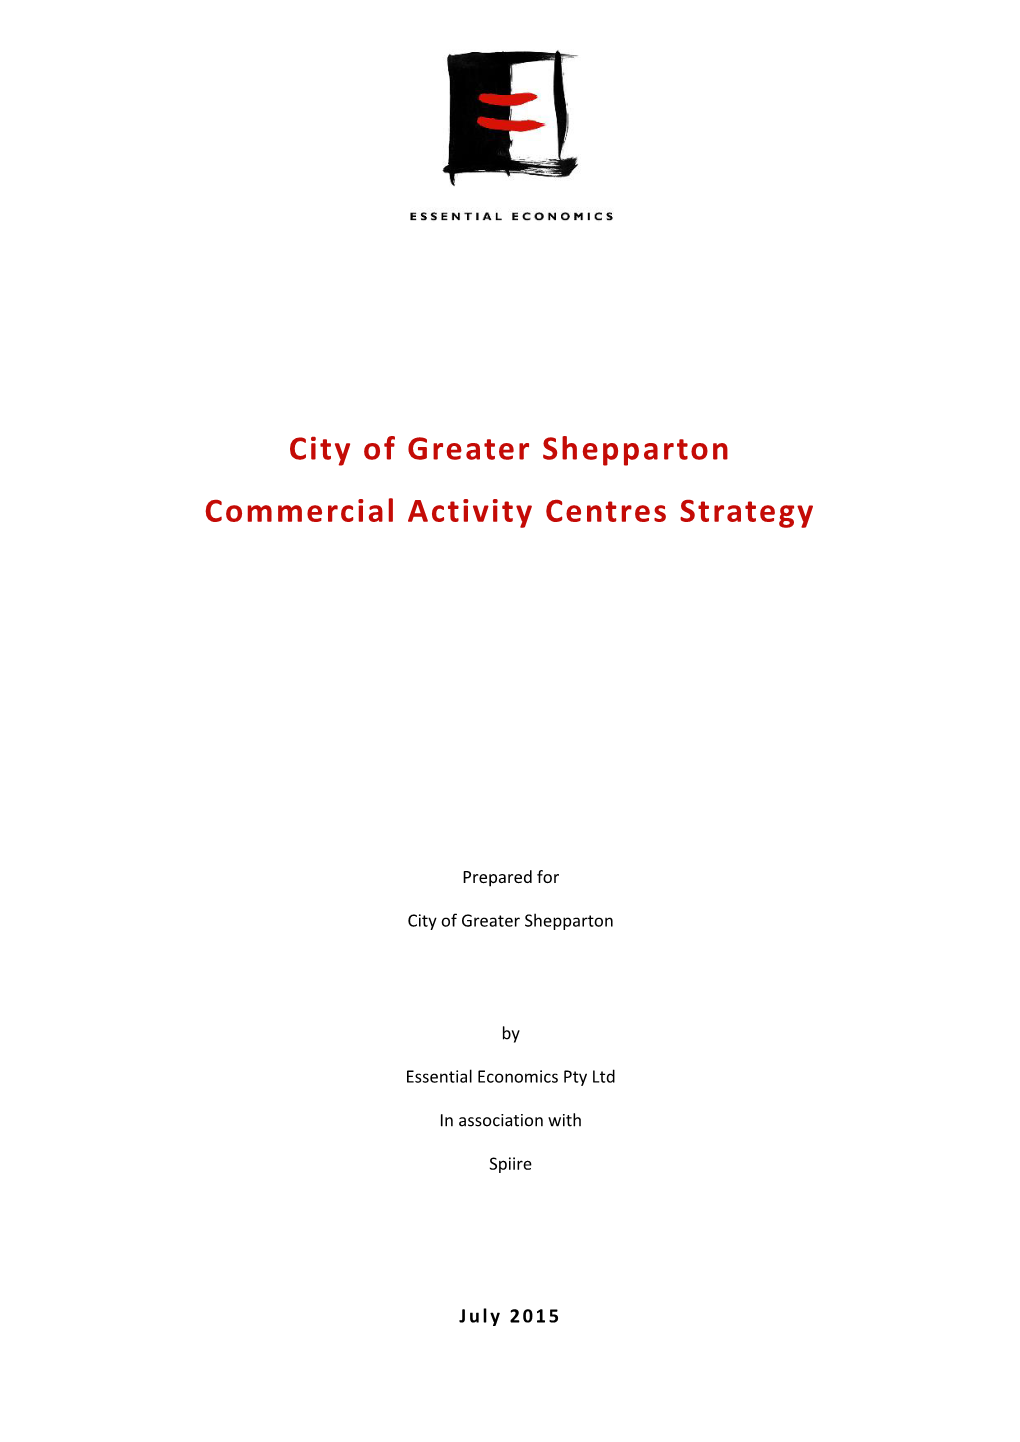 City of Greater Shepparton Commercial Activity Centres Strategy